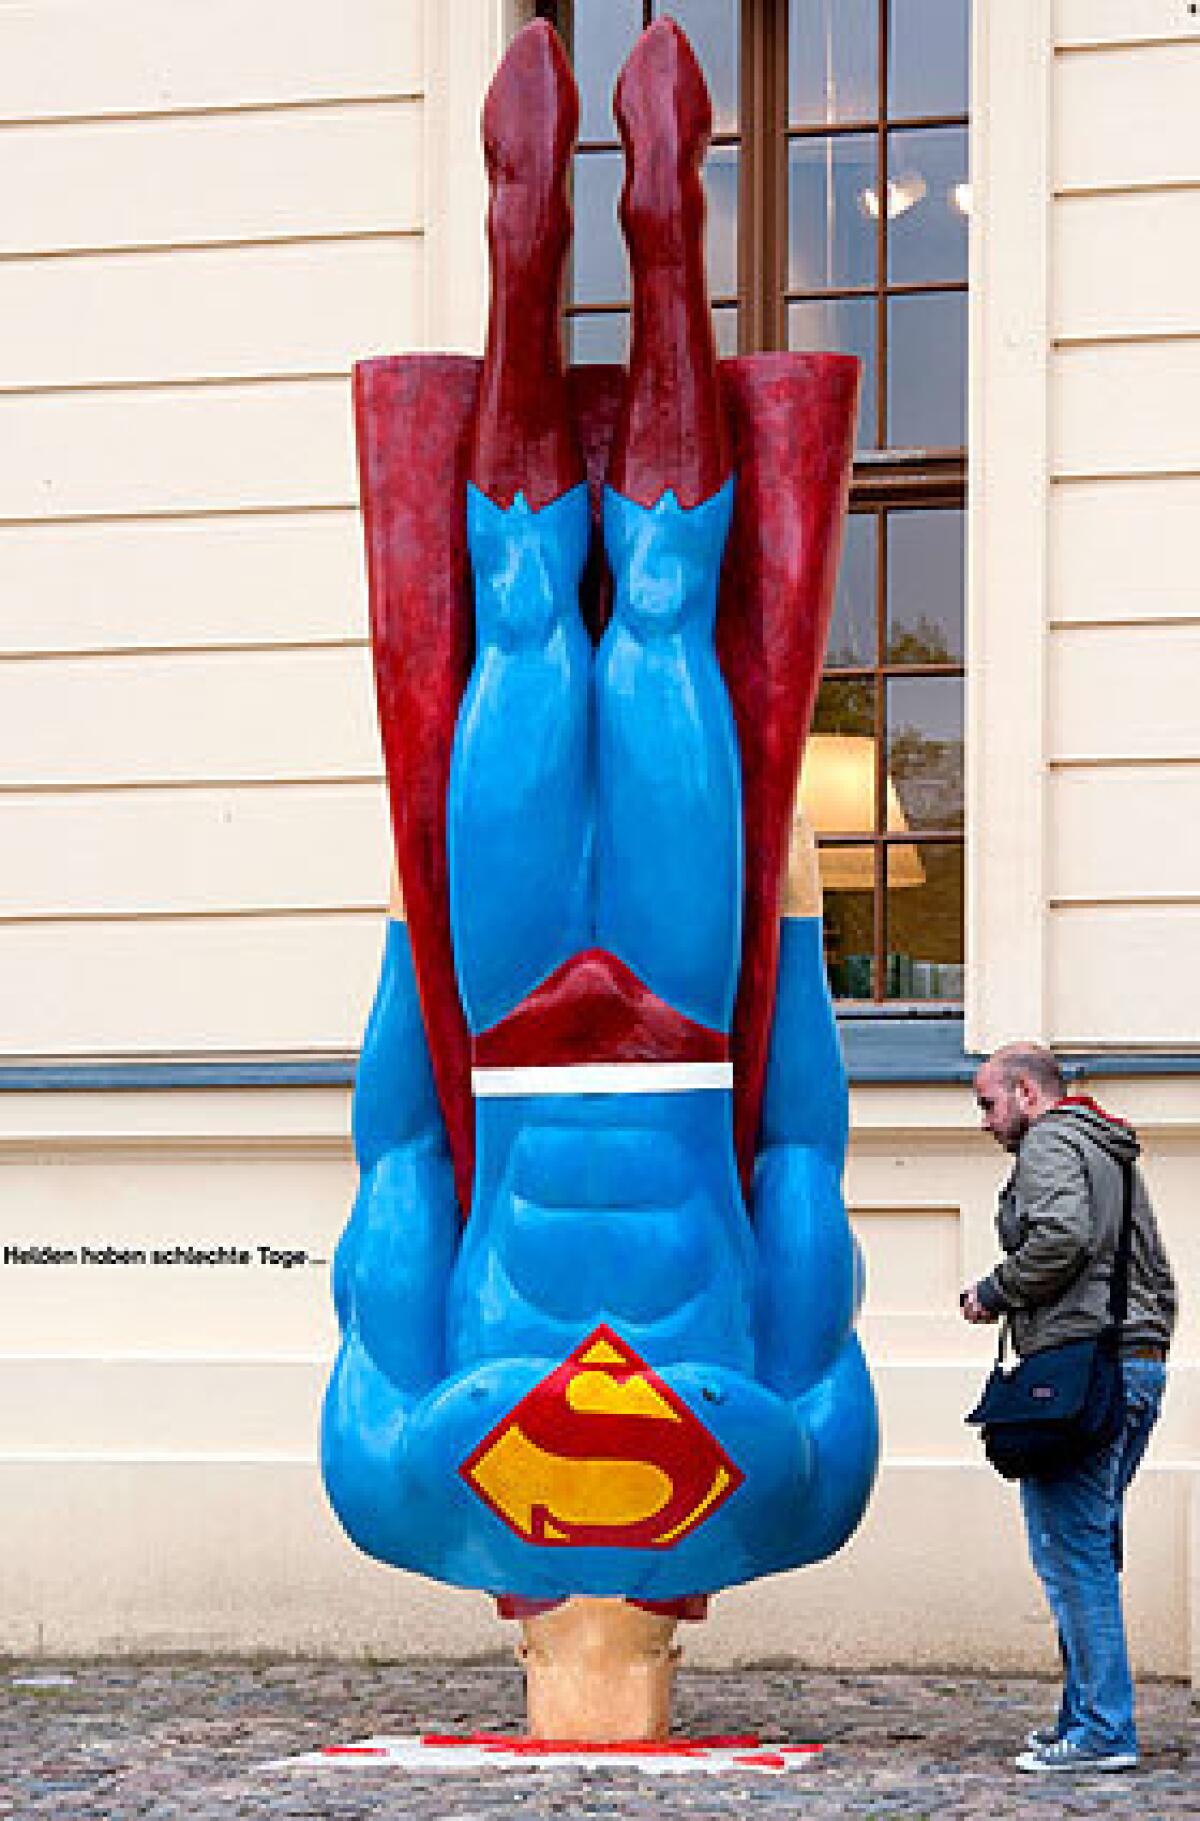 A man looks at a Superman sculpture by German artist Marcus Wittmers in front of the Jewish Museum. The sculpture called "Also Heroes Have Bad Days" is part of the exhibition "Heroes, Freaks and Superrabbis: The Jewish Dimension of the Comic."